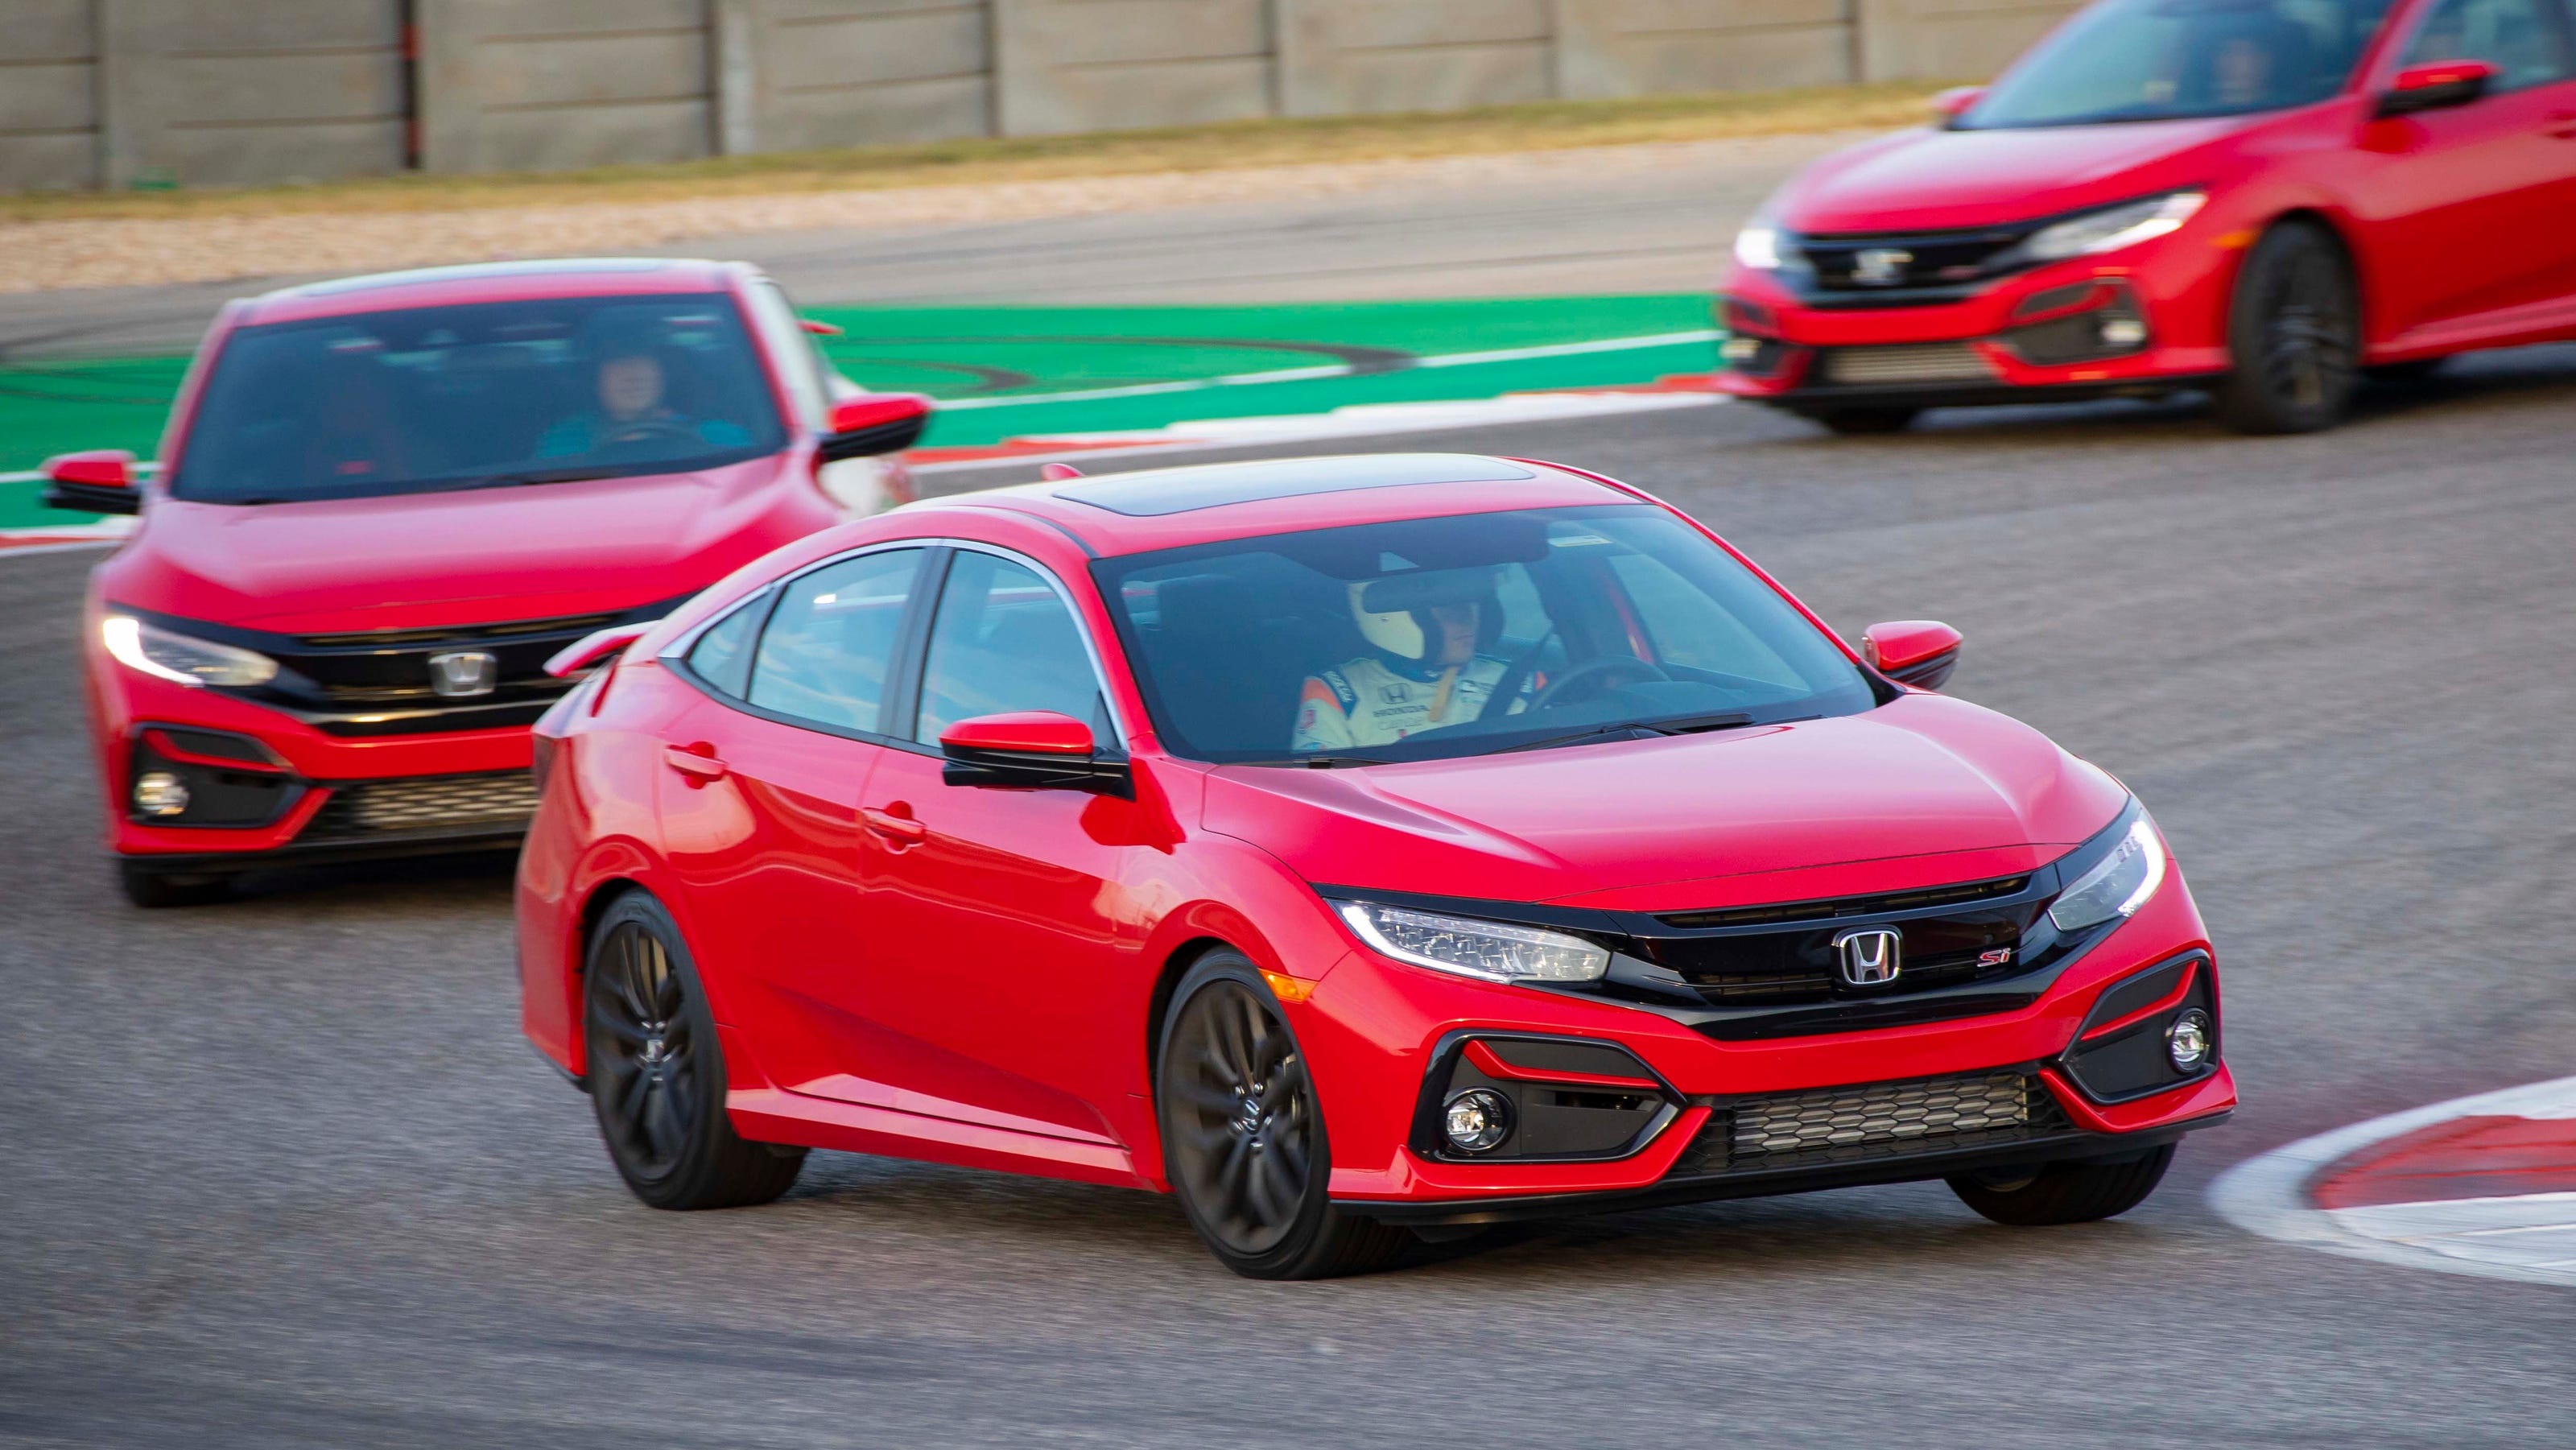 Review: 2020 Honda Civic Si just wants to have fun